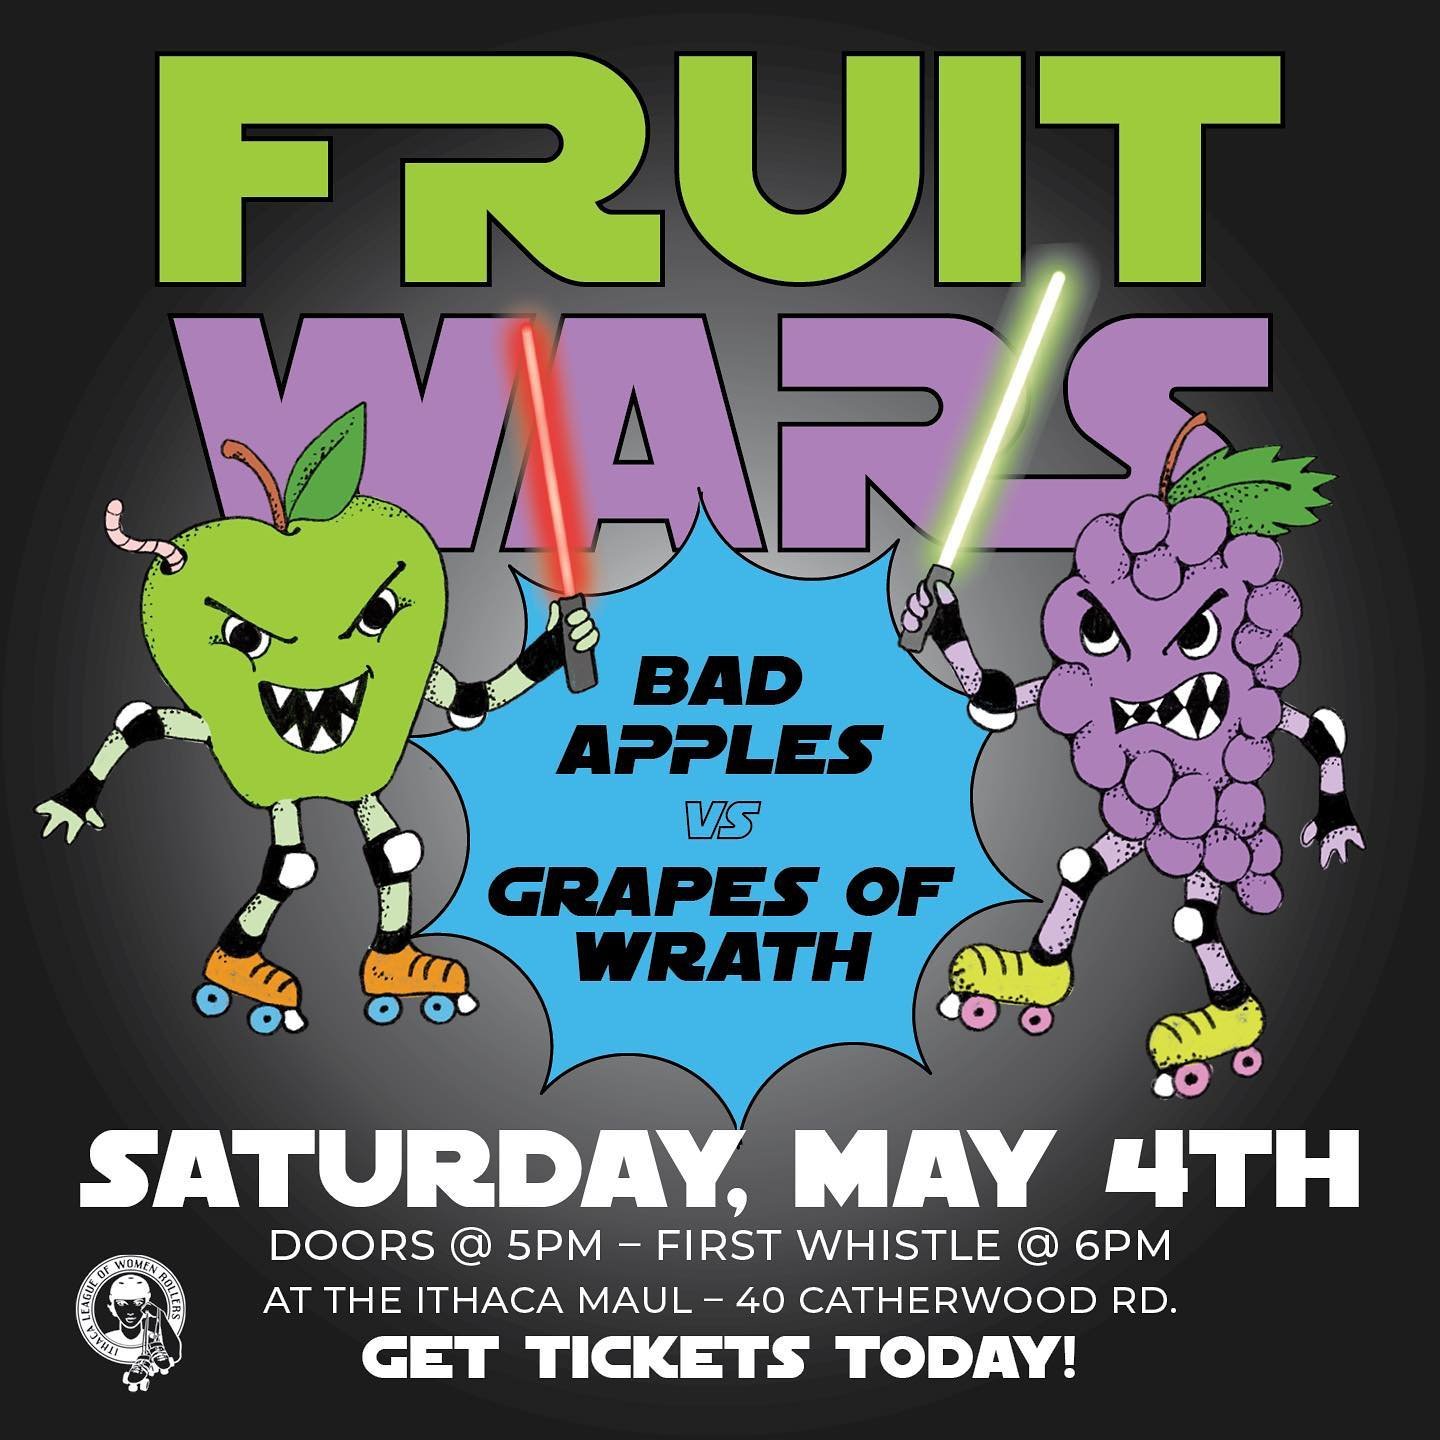 A long time ago in a galaxy far far away... the Bad Apples 🍏 and Grapes of Wrath 🍇 were locked in a battle for the balance of the universe. Come witness the saga unfold on May 4th. Doors open at 5pm, first whistle at 6pm.

🎟️ Tickets 🎟️ 
Adults: 